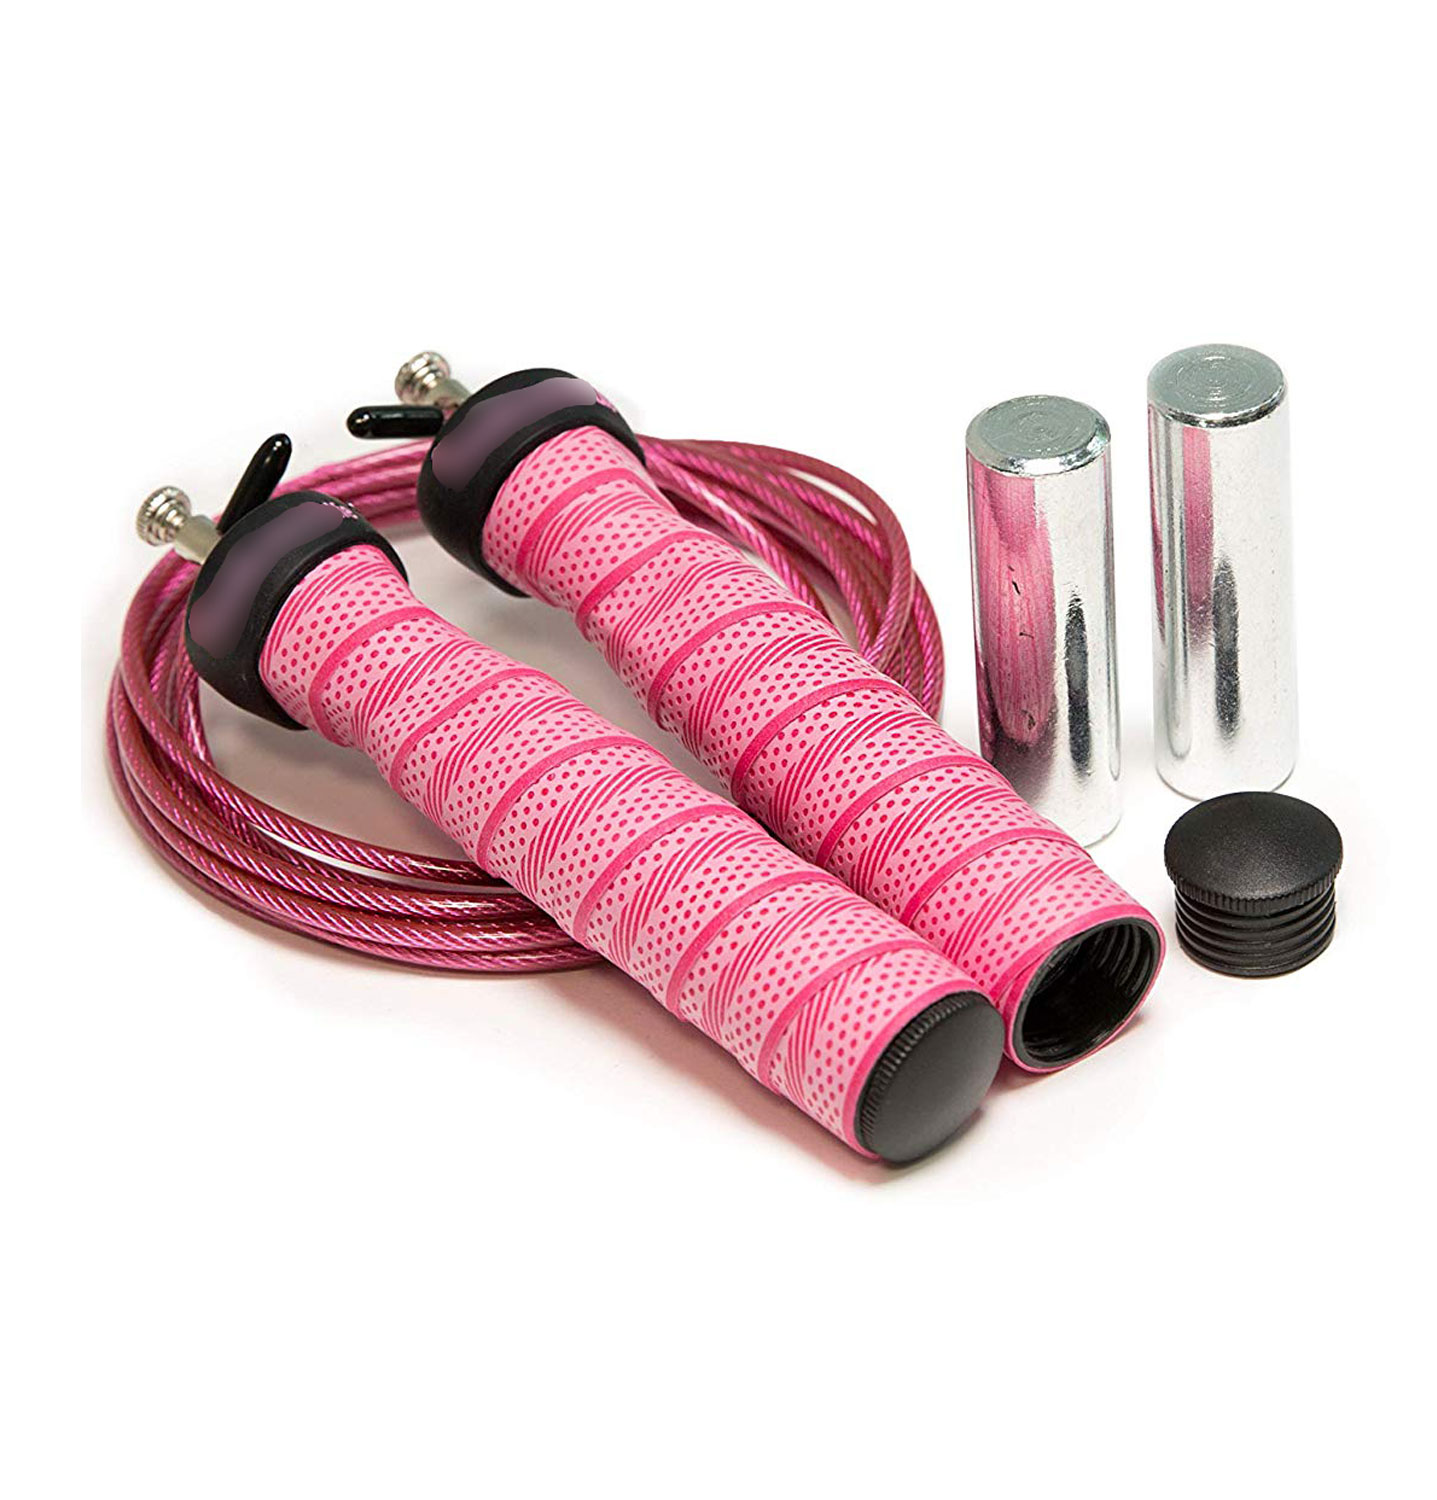 Sweatband Skipping Rope, Weighted Speed Jump Rope, Steel Wire Adjustable Jumping Ropes